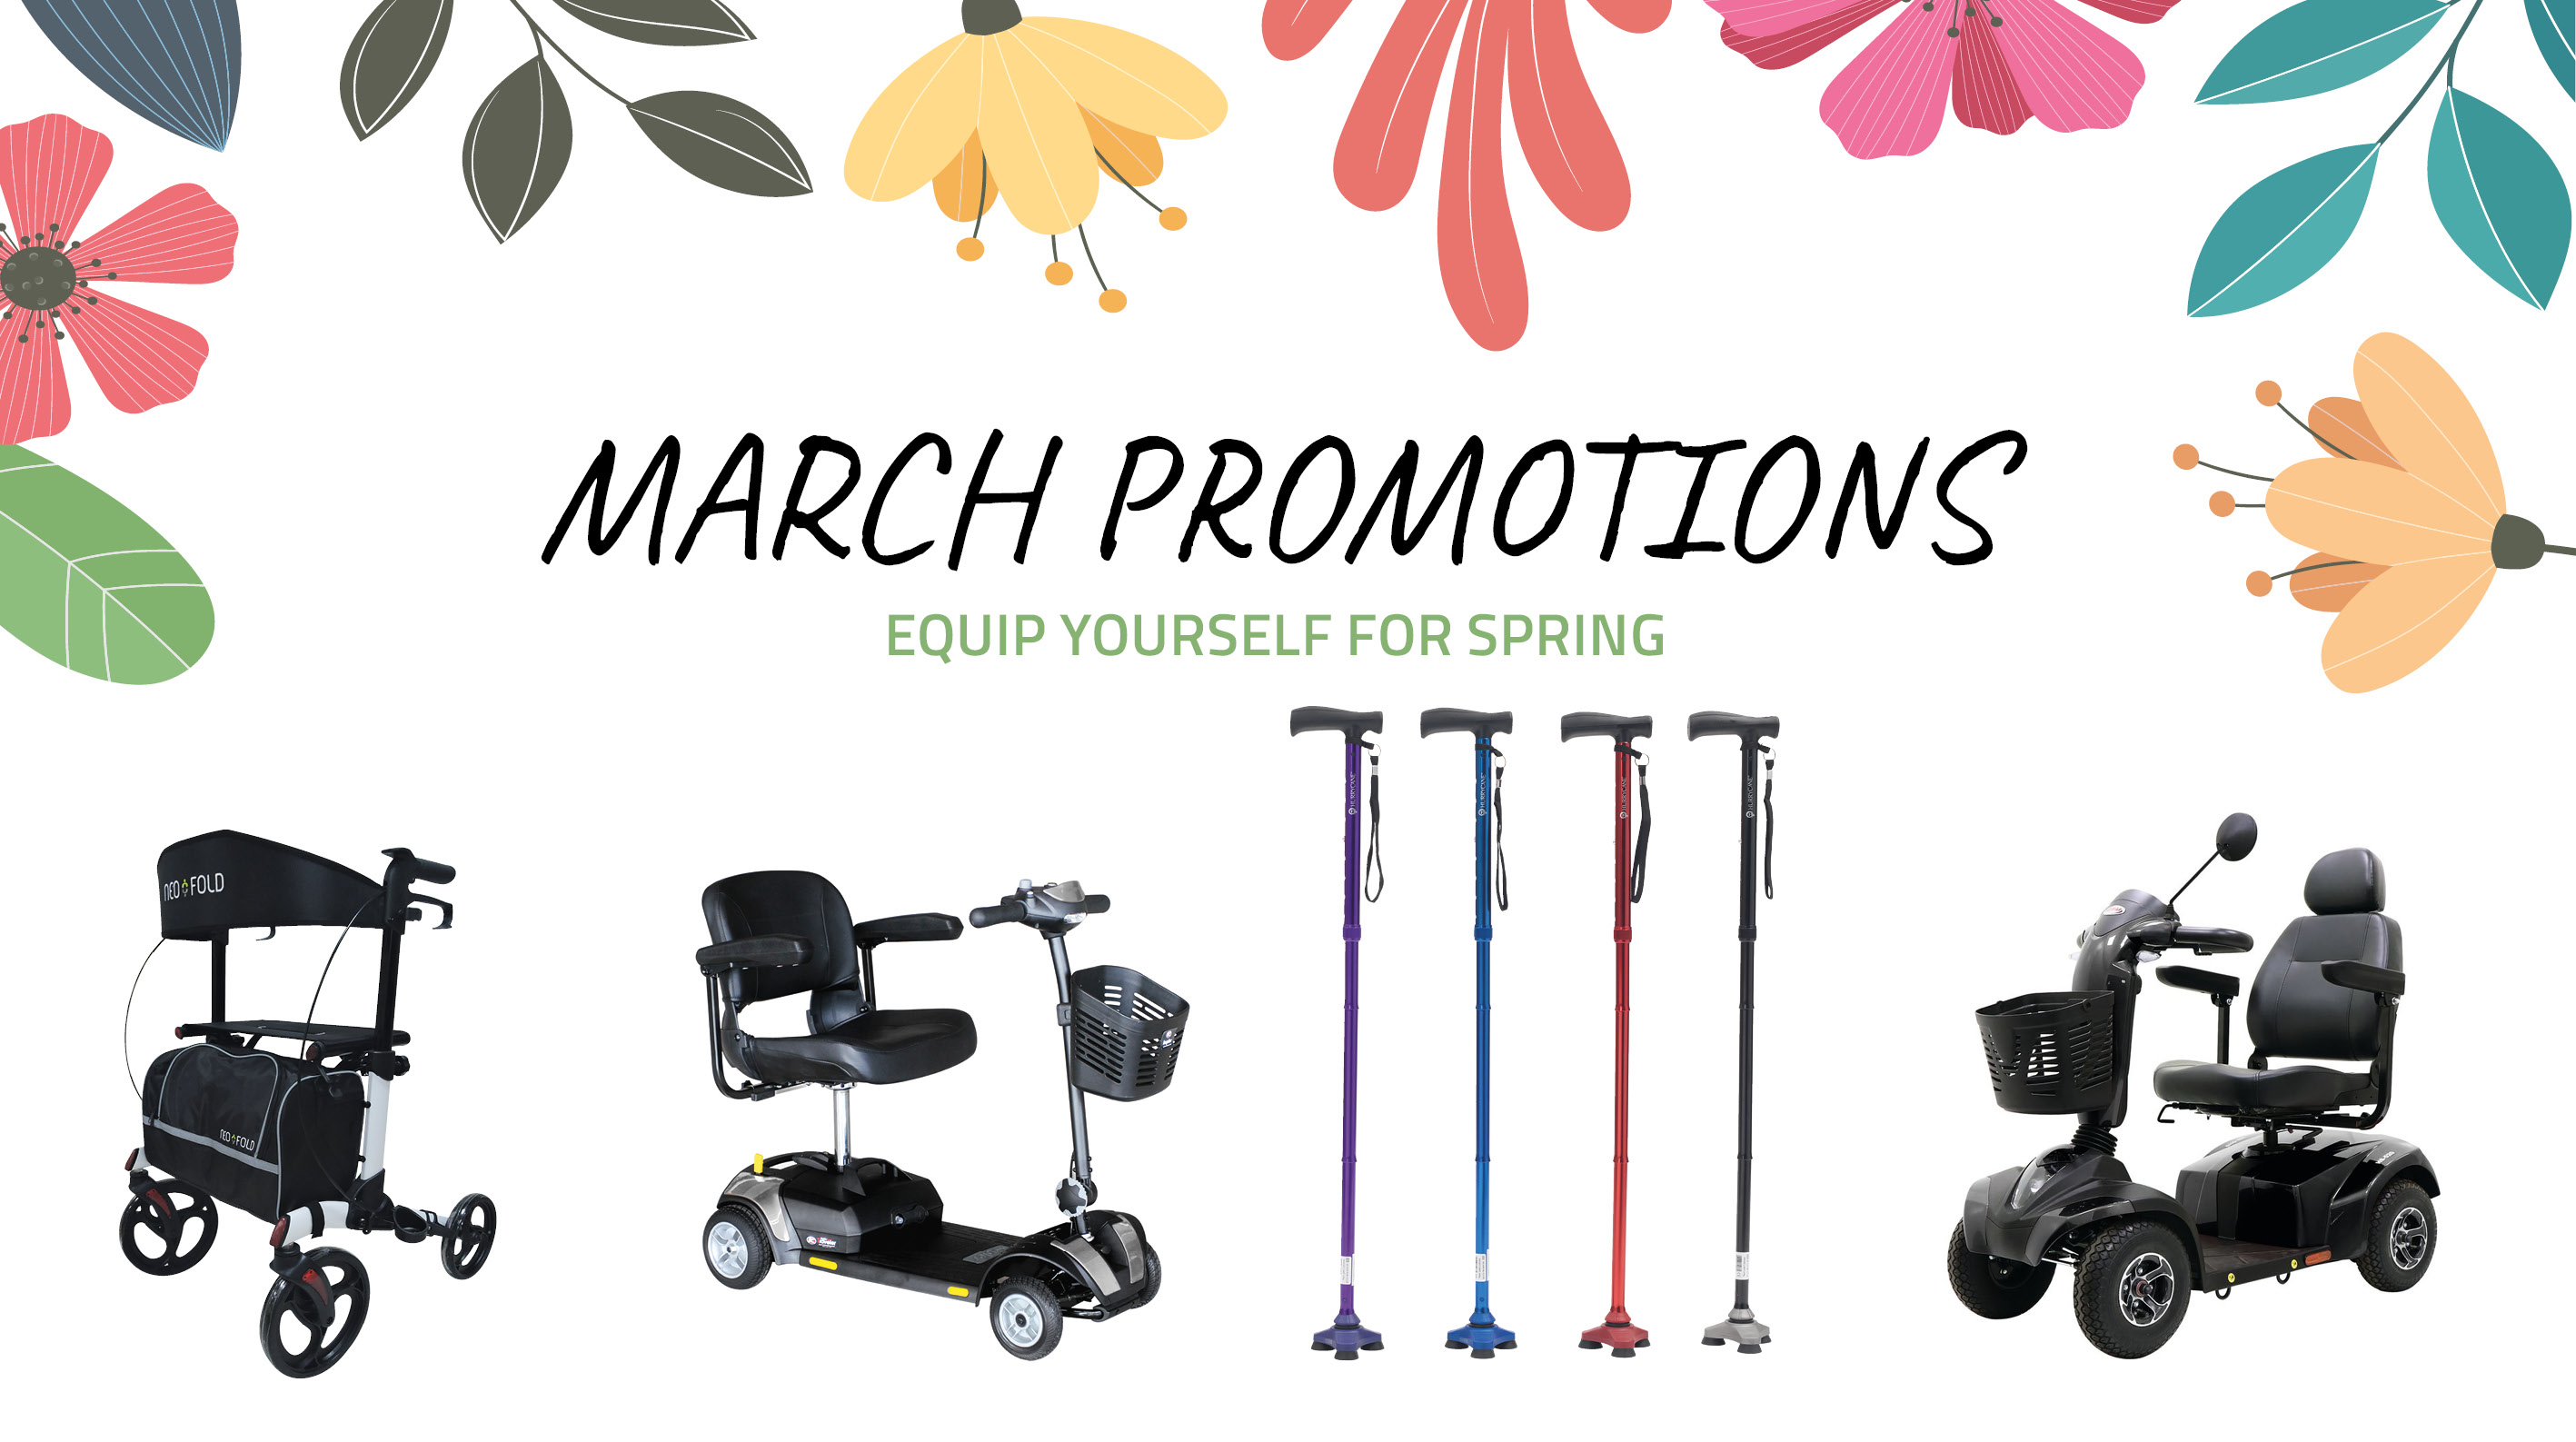 Discover our March promotions